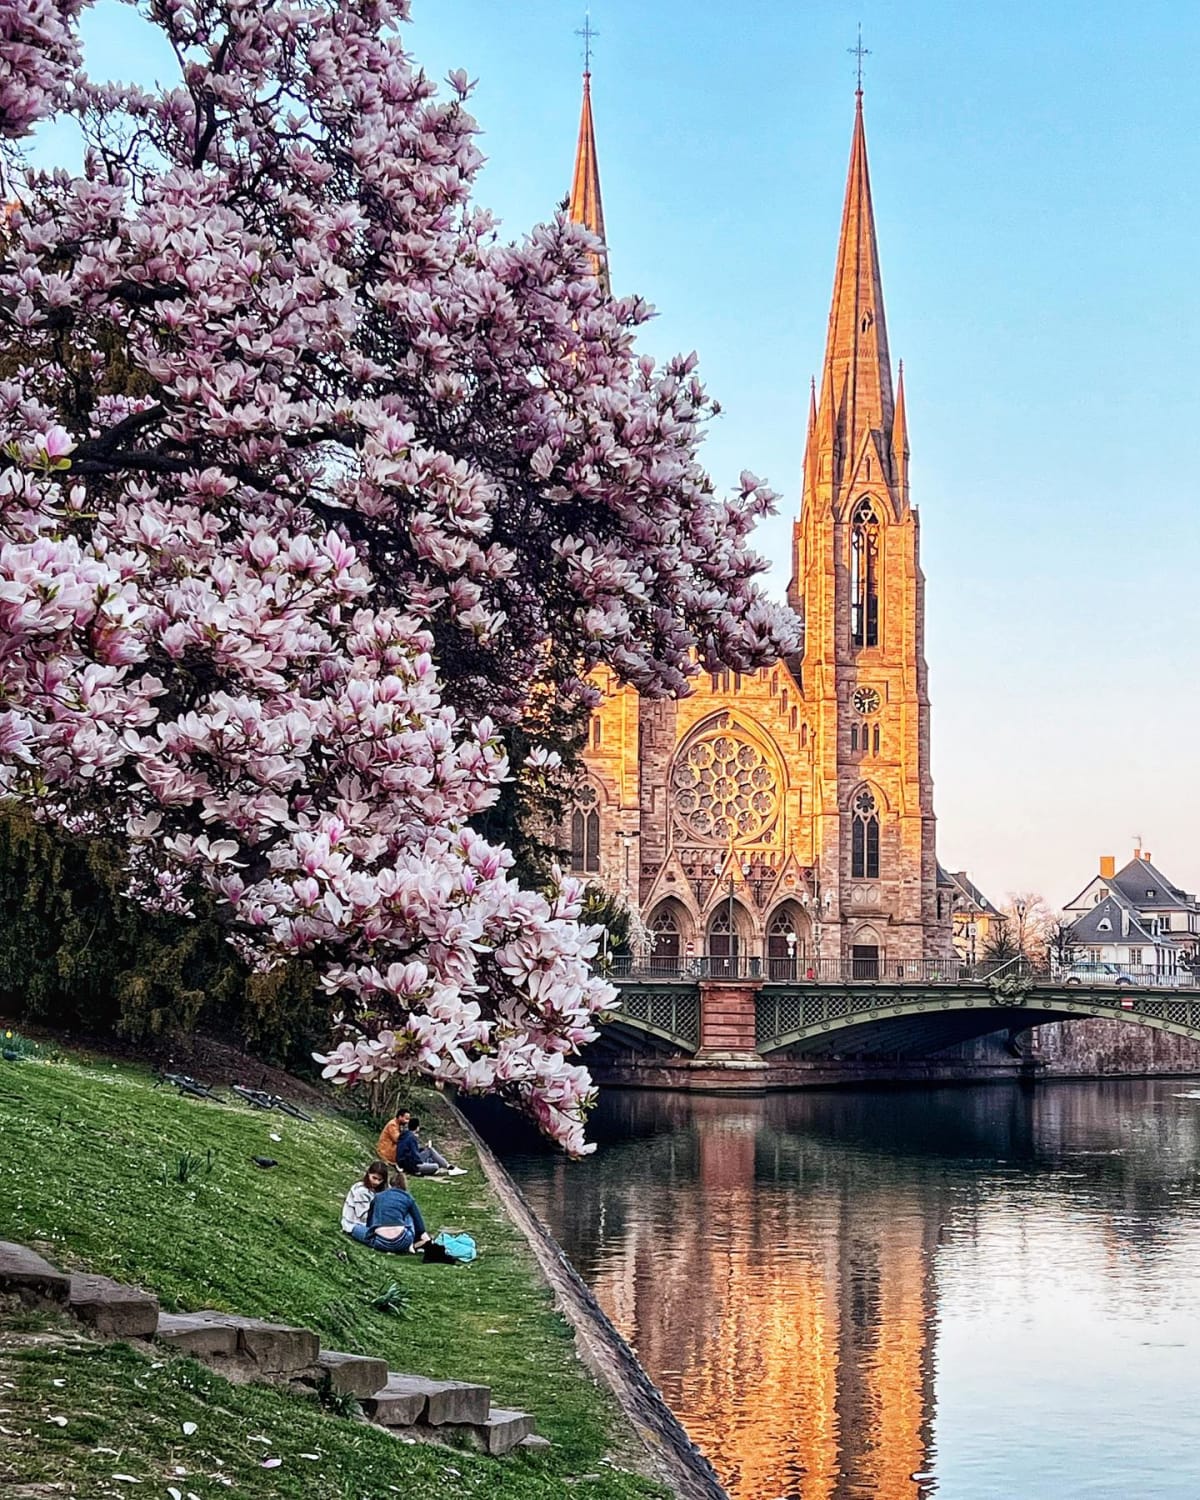 19th century Gothic Revival St. Paul's Church by the Ill River flowing through historic Strasbourg in the Spring, Alsace, Grand Est, eastern France.